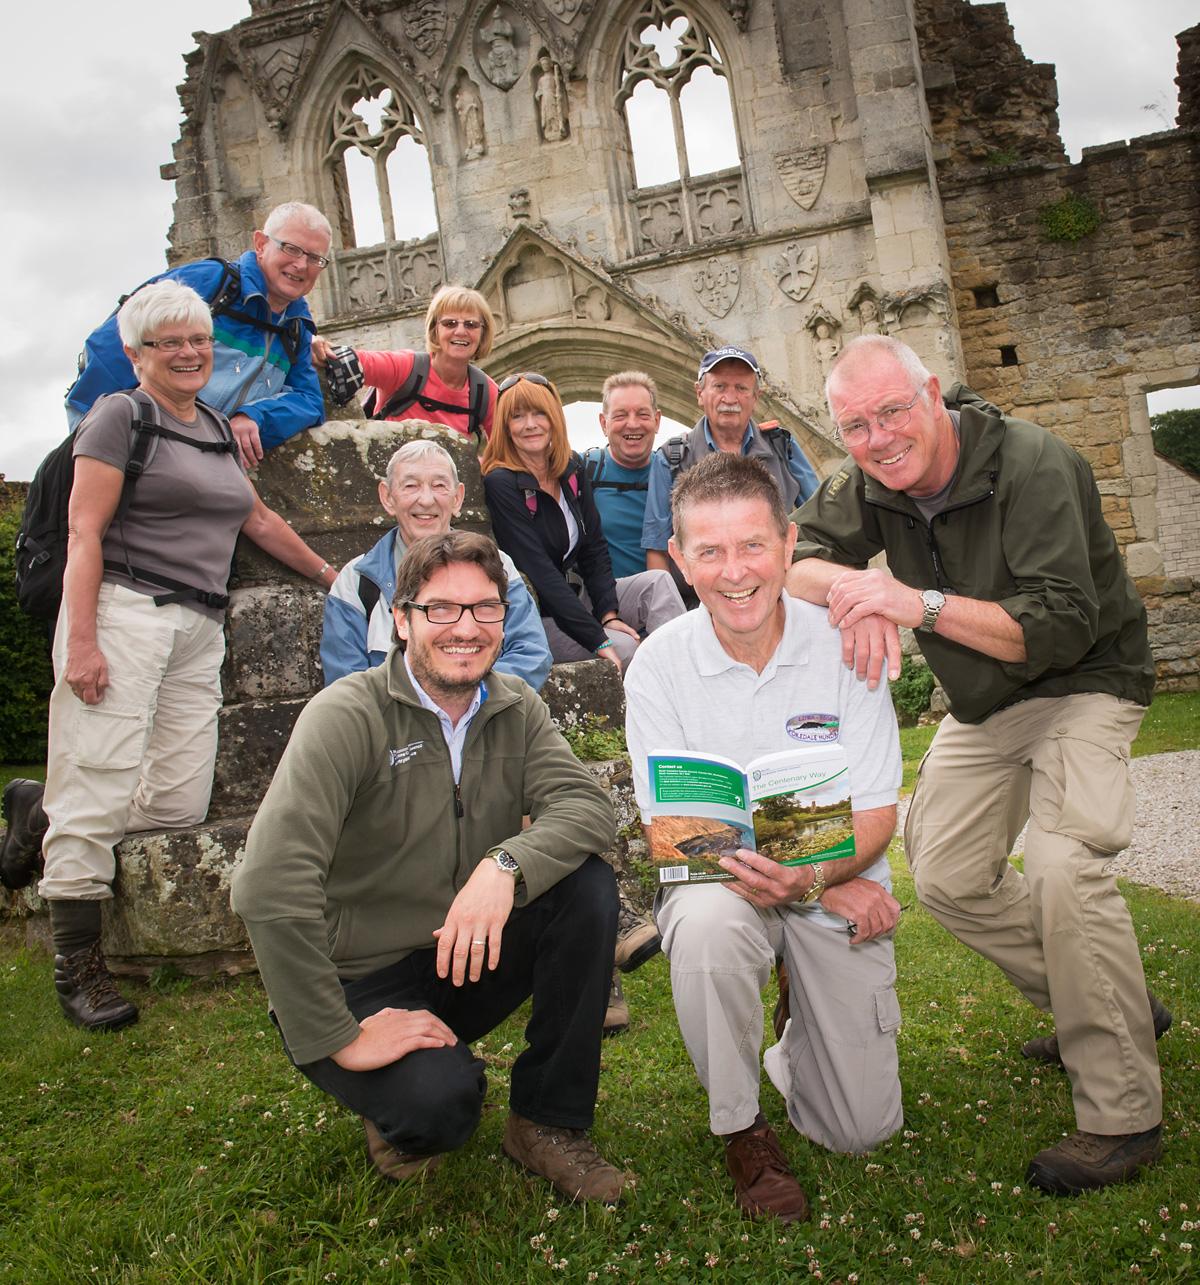  Author John Sparshatt, ranger Ben Jackson and countryside volunteer Mike Barney are joined at Kirkham Abbey by enthusiastic walkers at the launch of a new walking guide to the reopened Centenary Way which runs from York Minster to Filey Brigg.